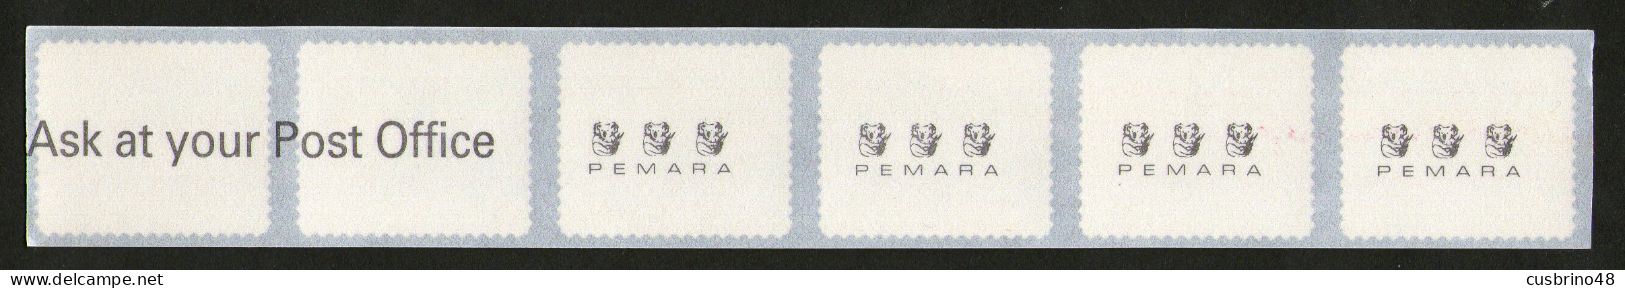 AUSTRALIA 1992 P&S Strip 6 45c Endangered Species PEMARA 3 Koala - Ask At Your Post Office On The Reverse. Lot AUS 255 - Mint Stamps